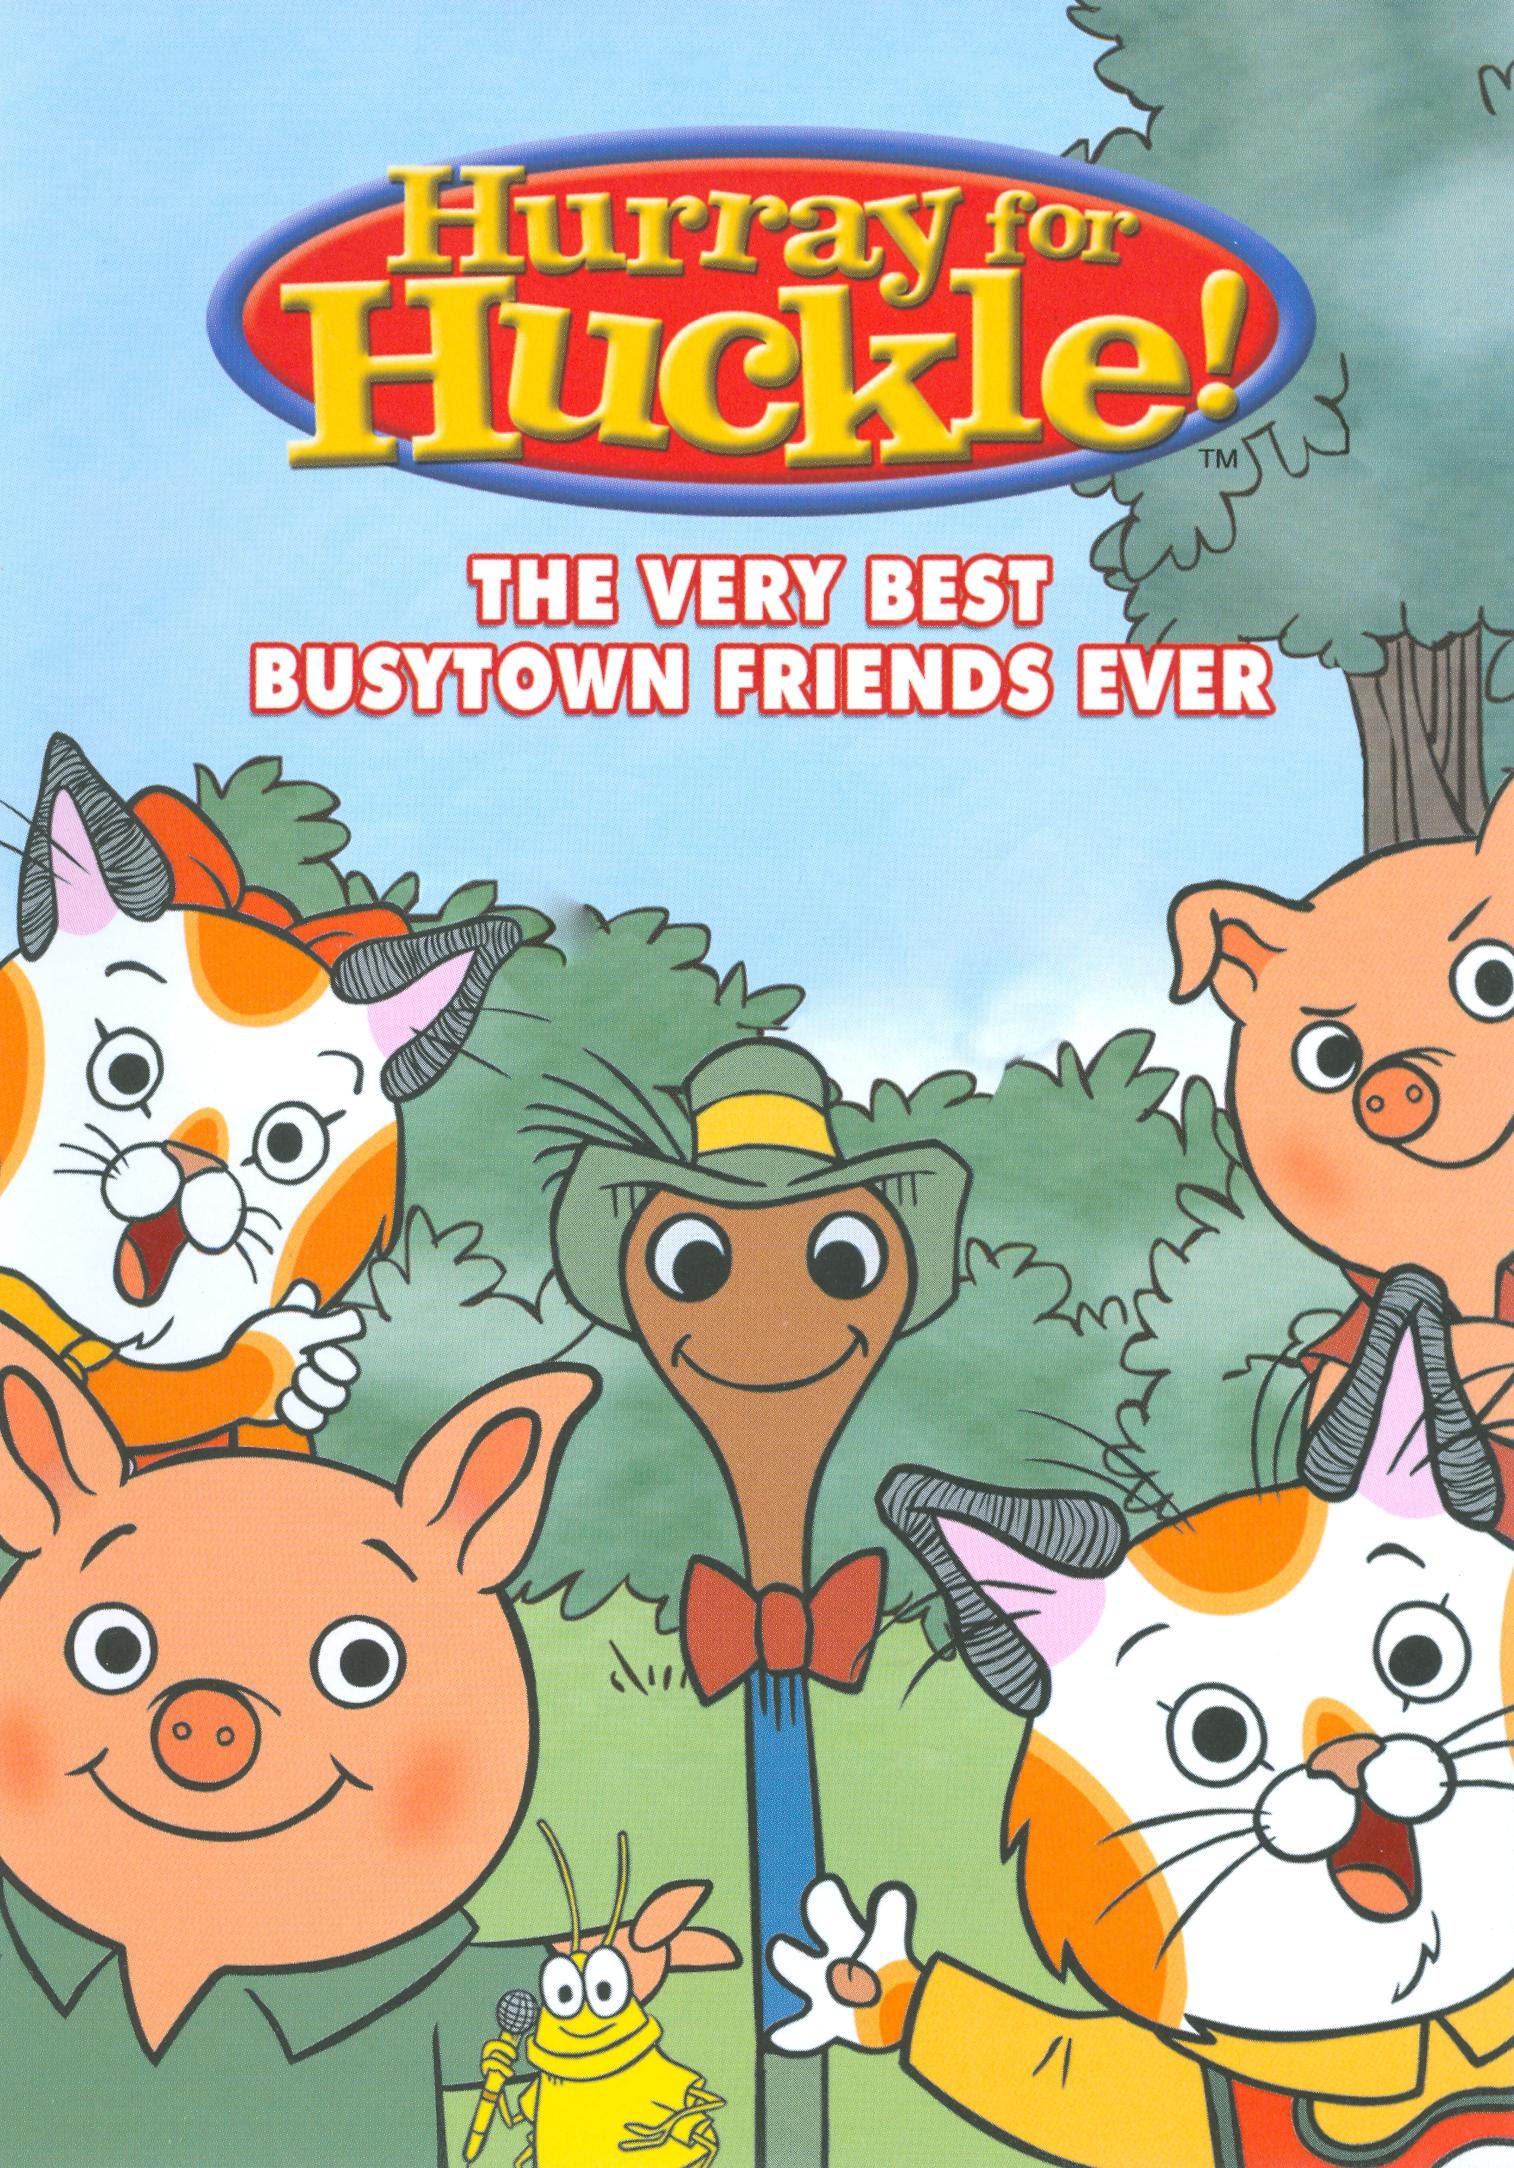 Best Buy: Hurray for Huckle!: The Very Best Busytown Friends Ever! [DVD]